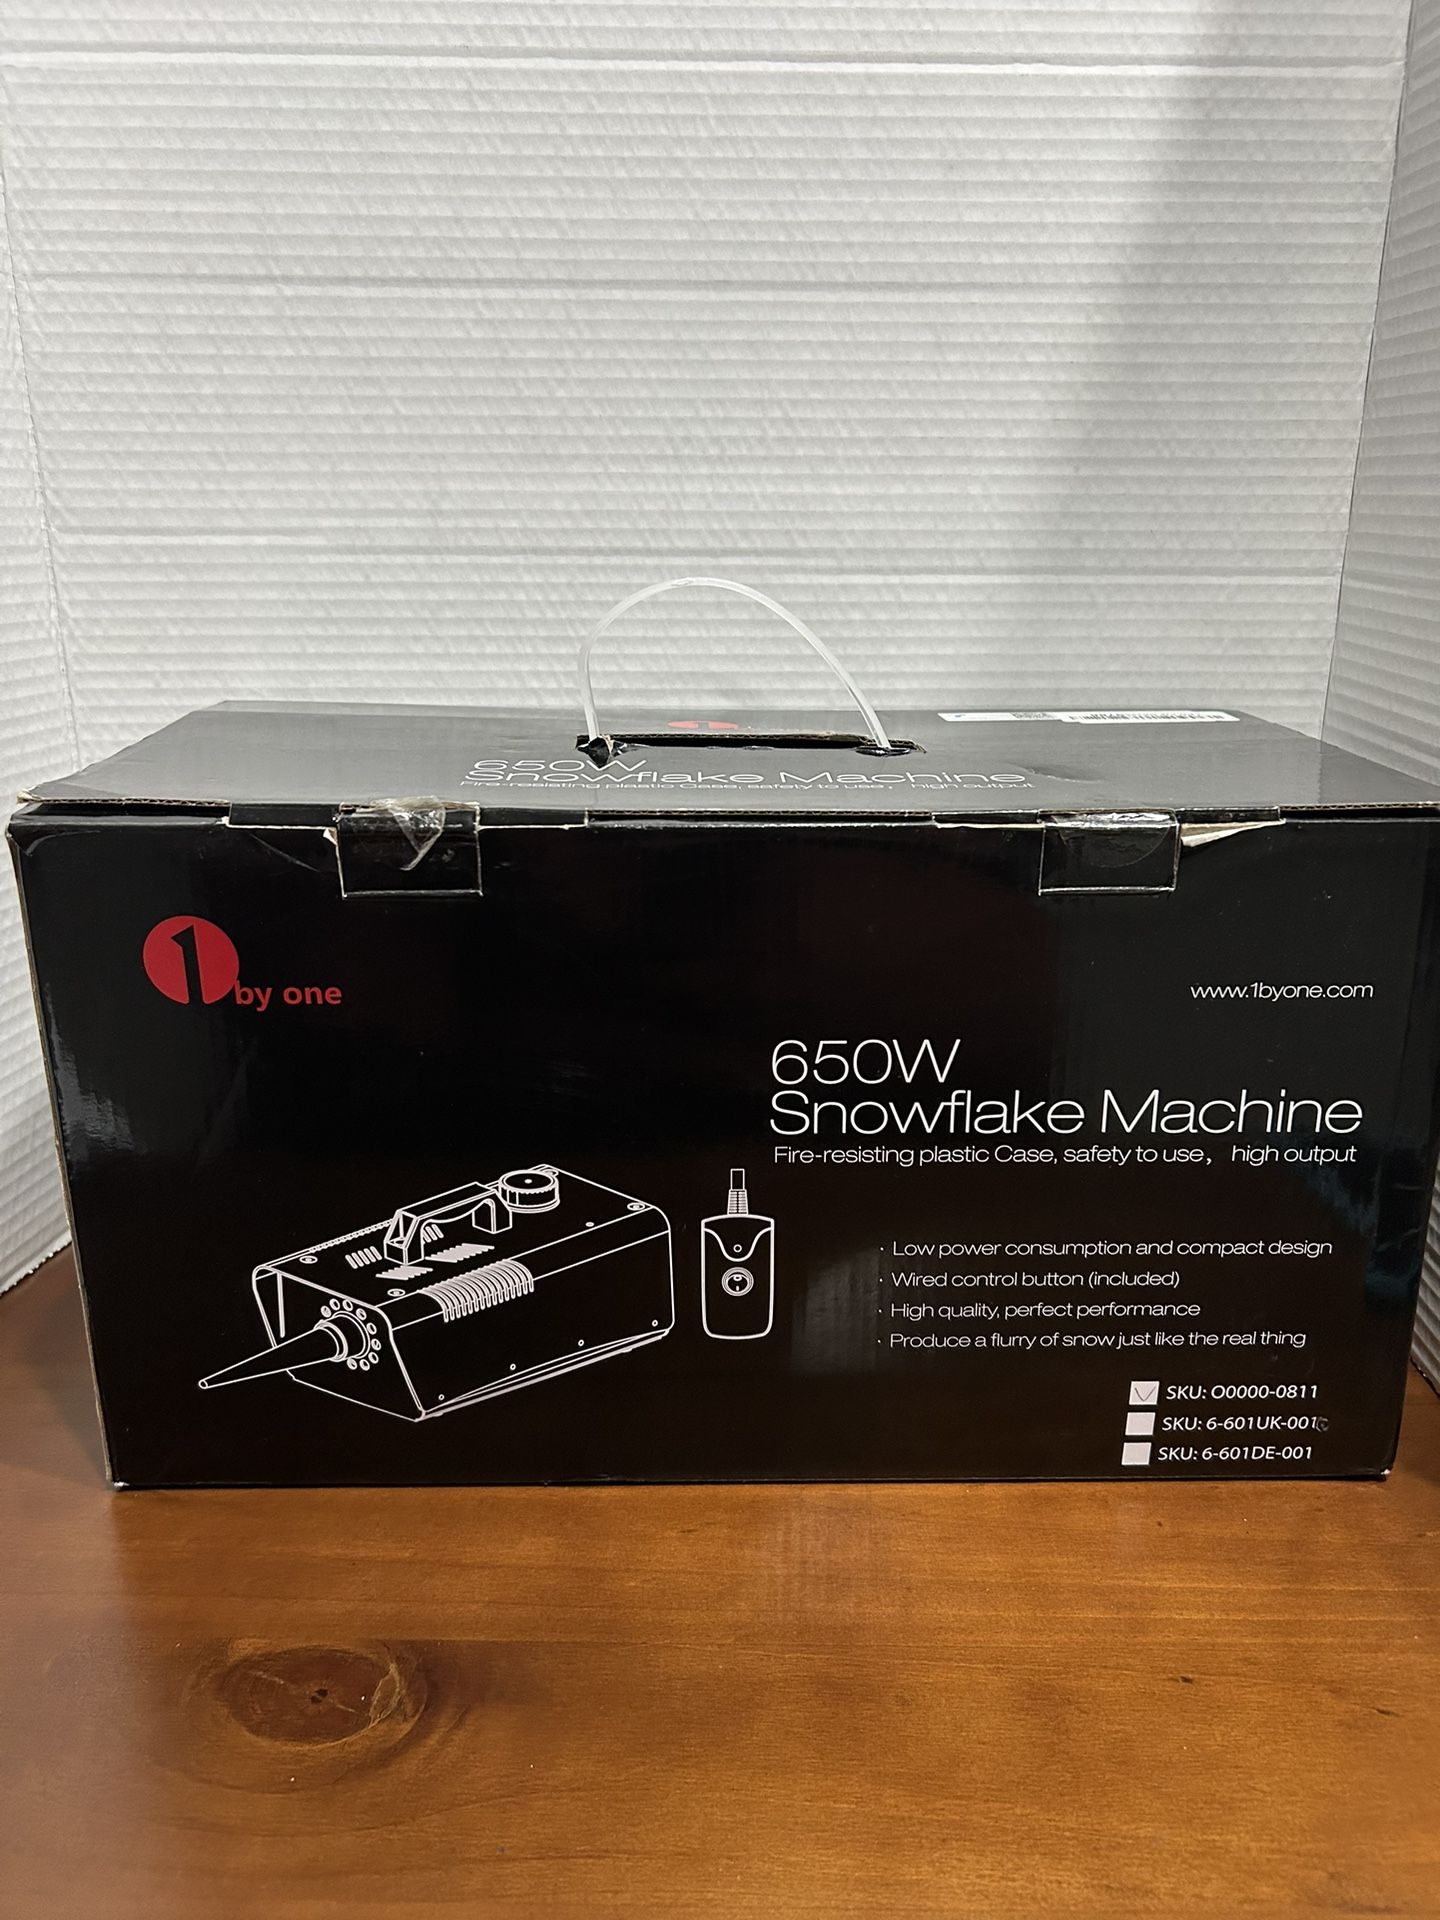 1byone 650W Snow Machine Wired Remote Control Great Machine for Kids, Parties, Parades, LIKE NEW IN BOX